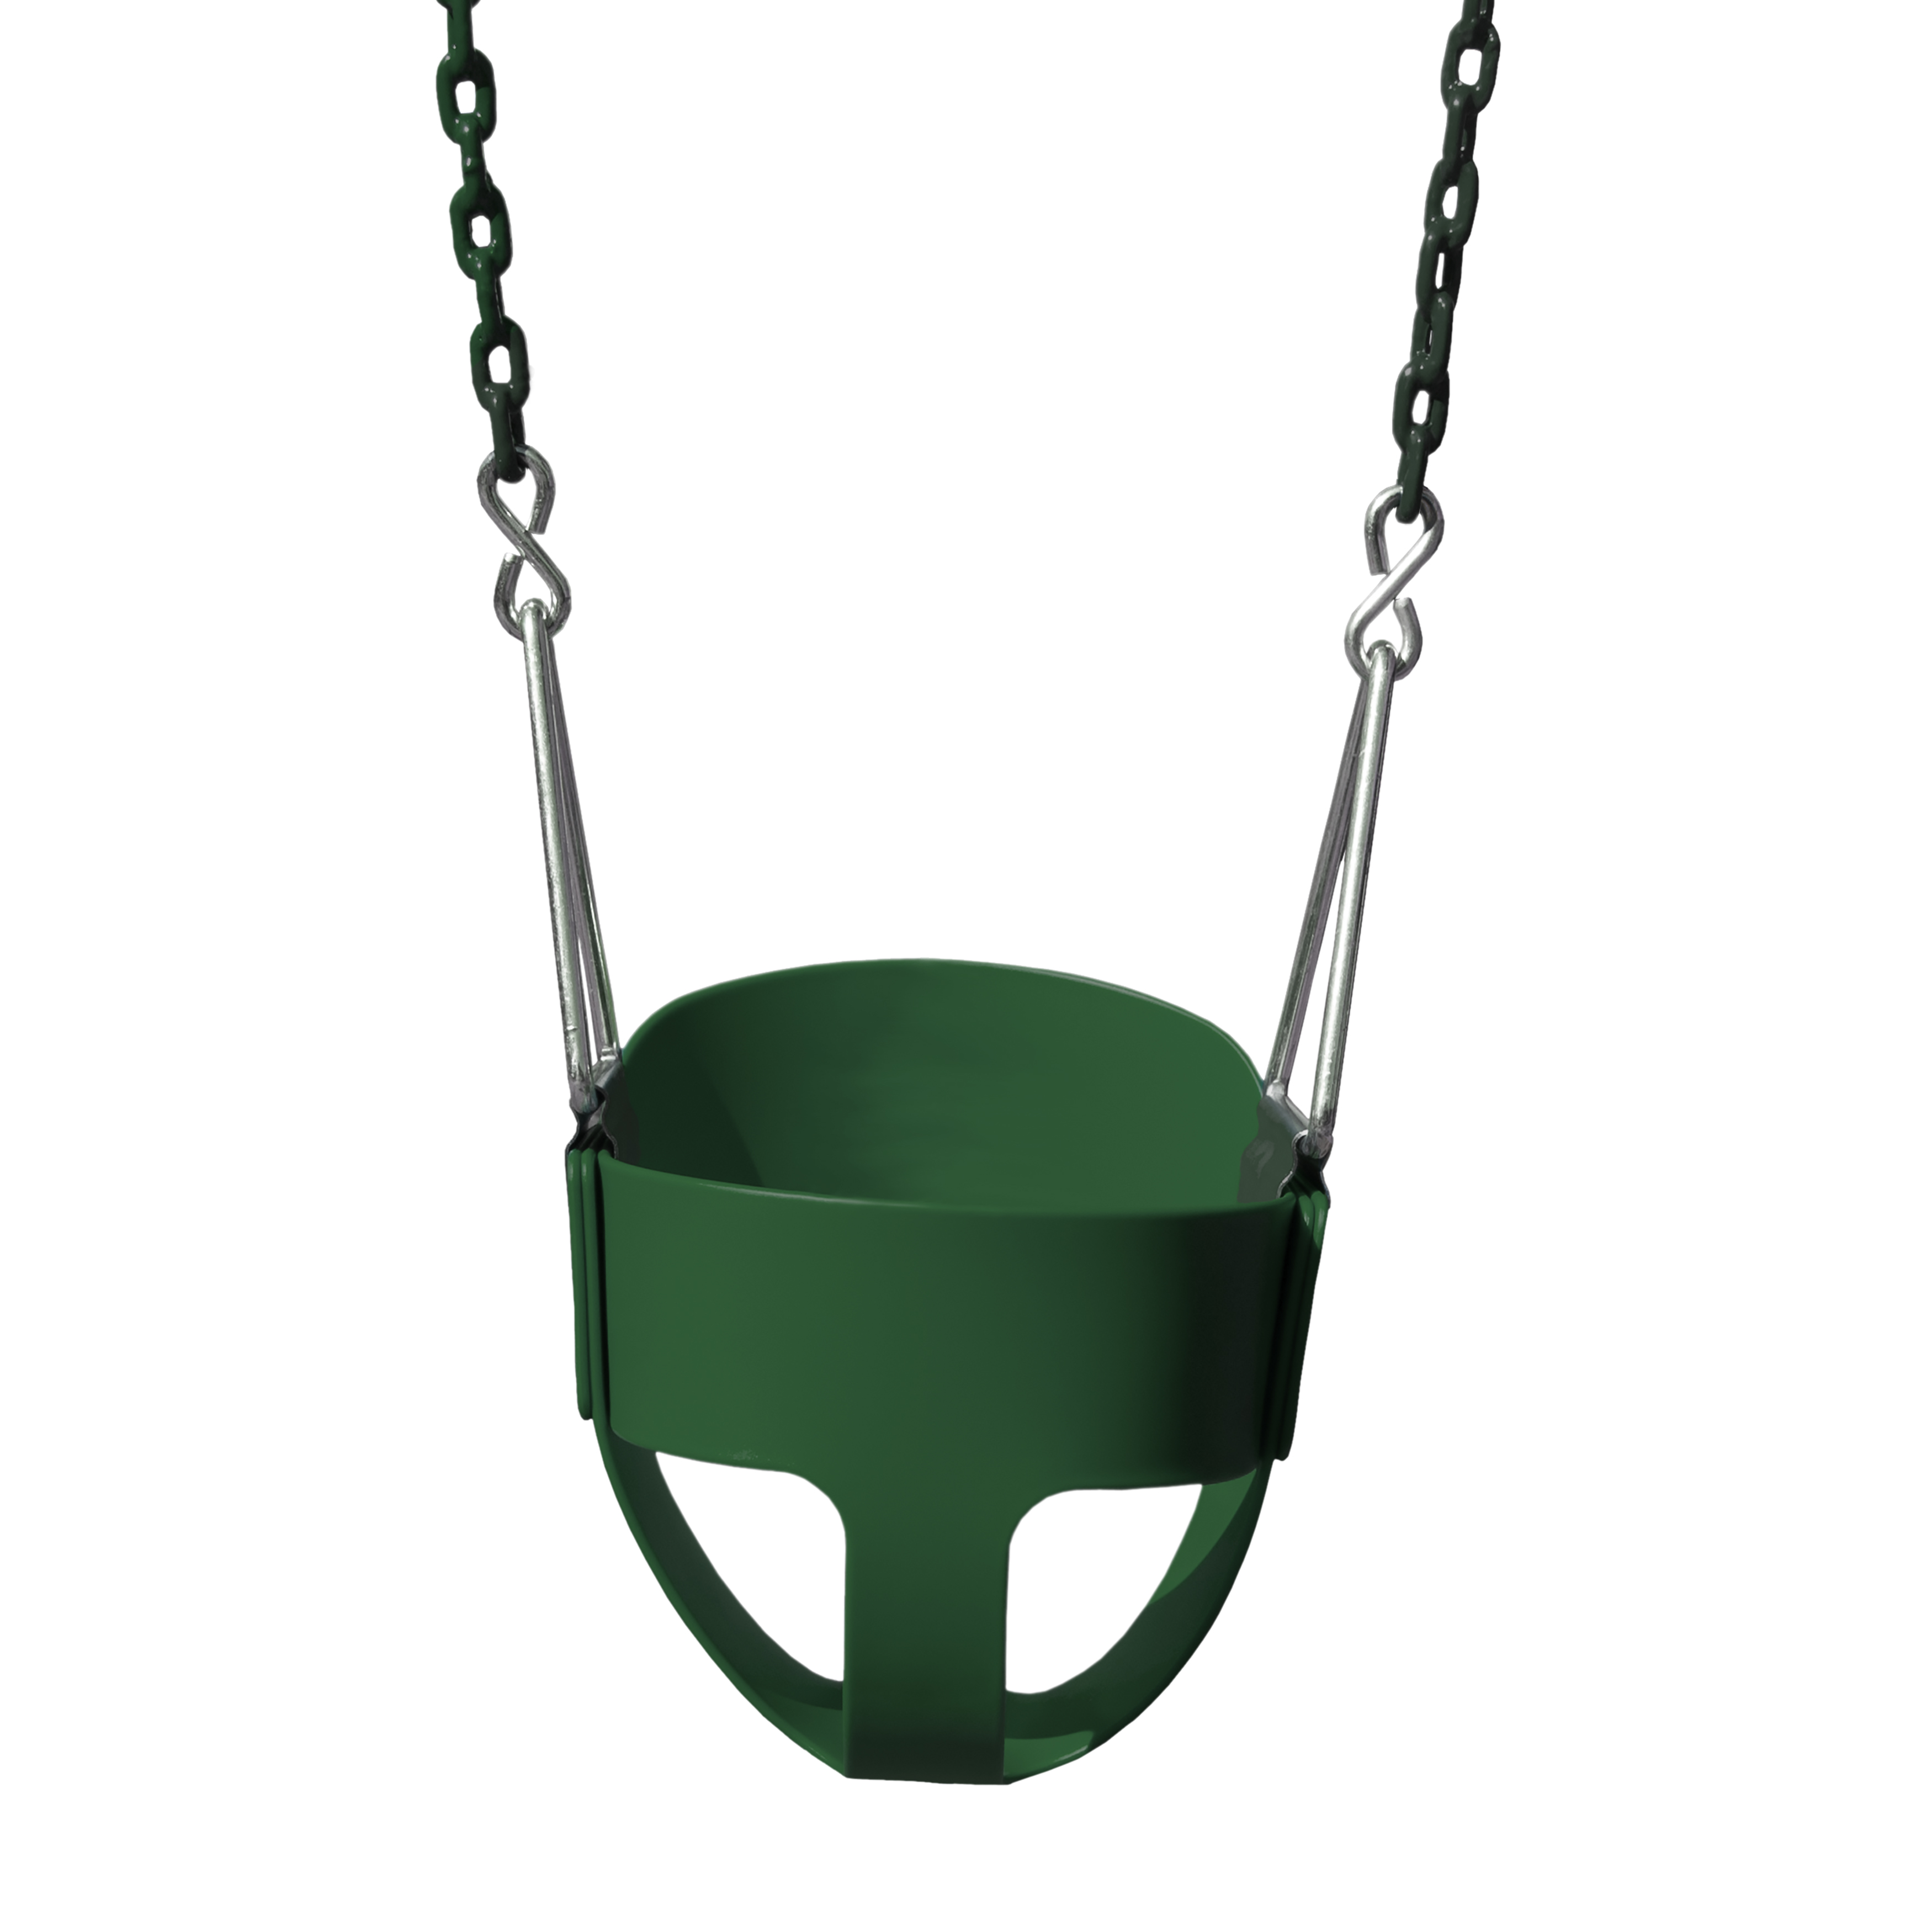 Gorilla Playsets Full Bucket Toddler Swing - Green with Green Chains - image 1 of 7